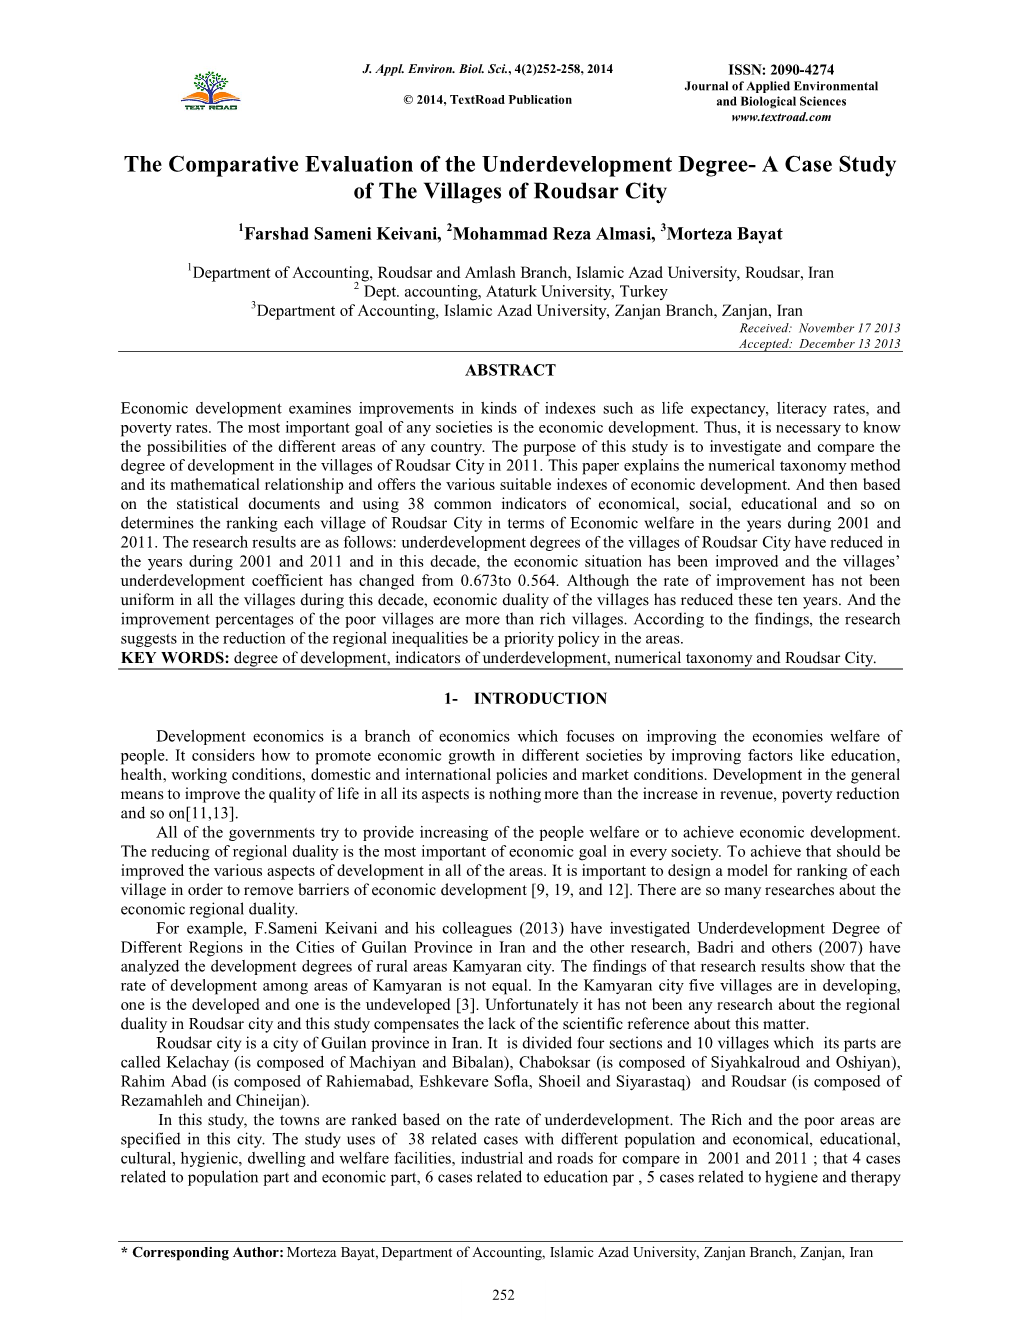 The Comparative Evaluation of the Underdevelopment Degree- a Case Study of the Villages of Roudsar City